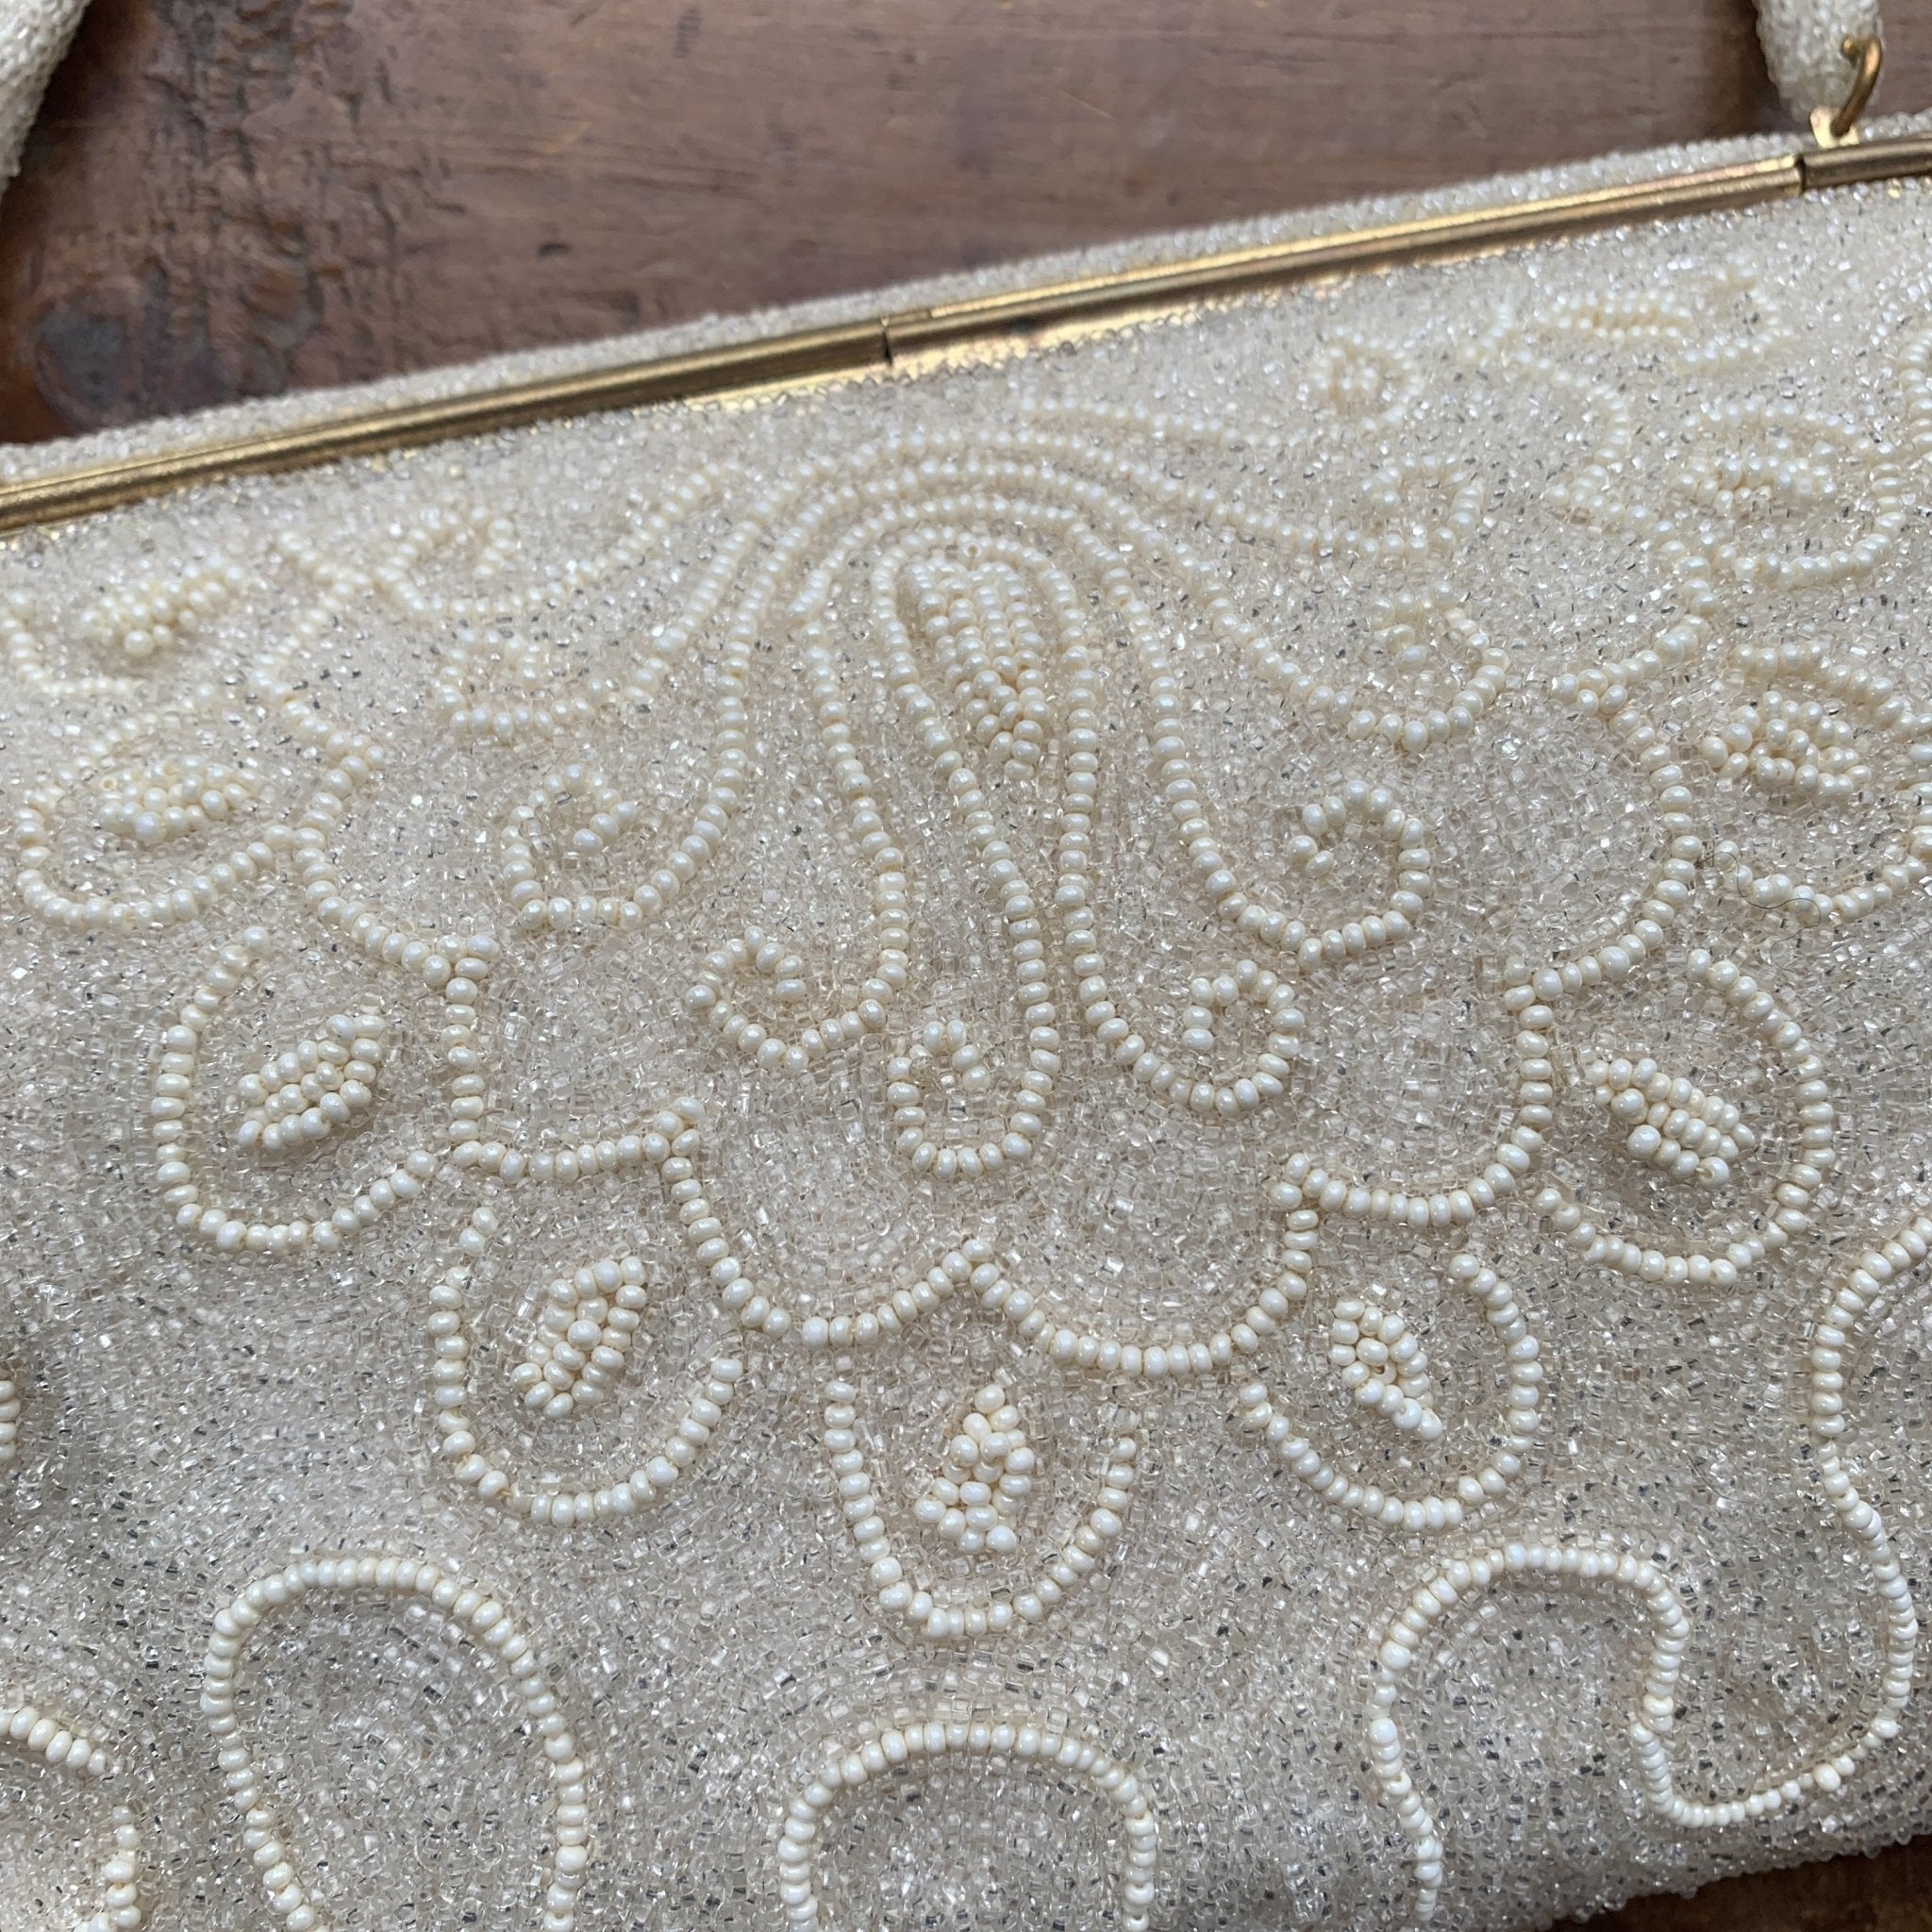 Vintage Cream Beaded Clutch from France. Formal Evening Bag. 1940s Sus